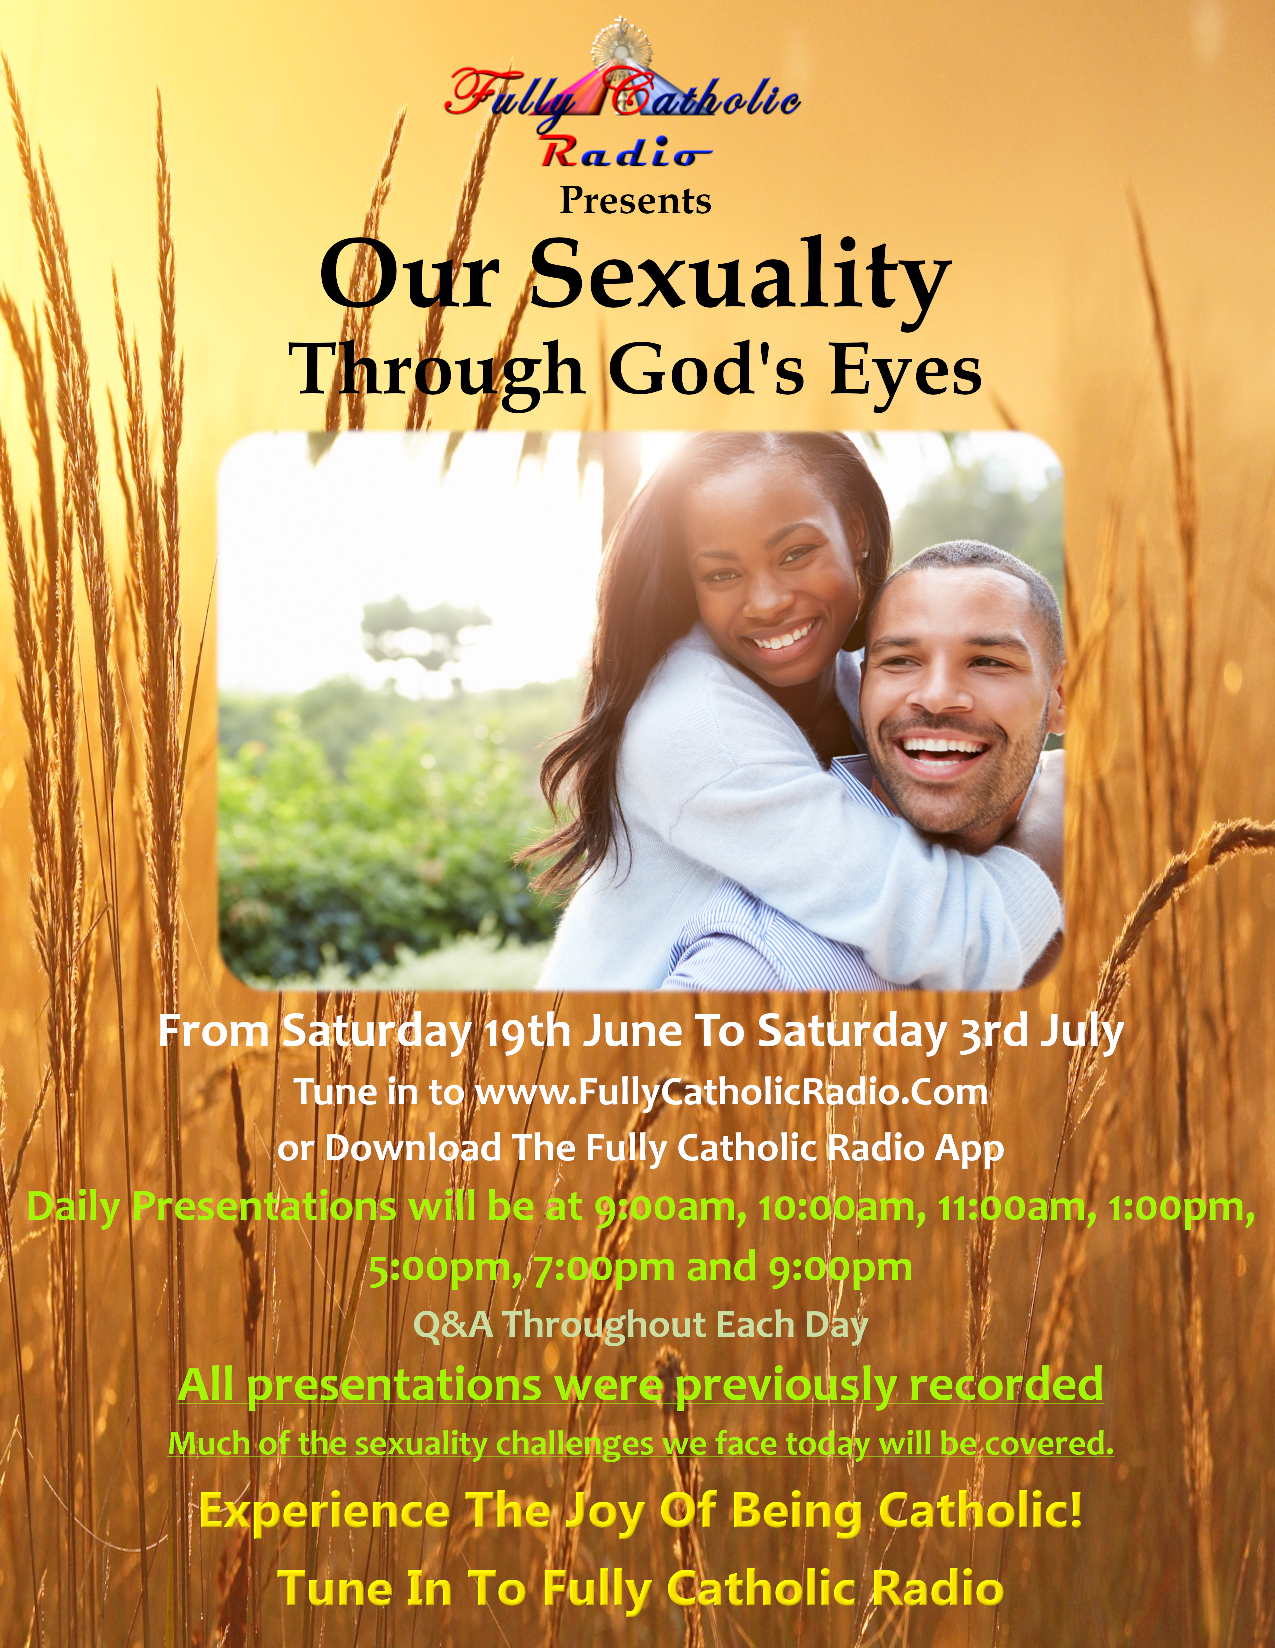 Our Sexuality Through God's Eyes - Broadcast